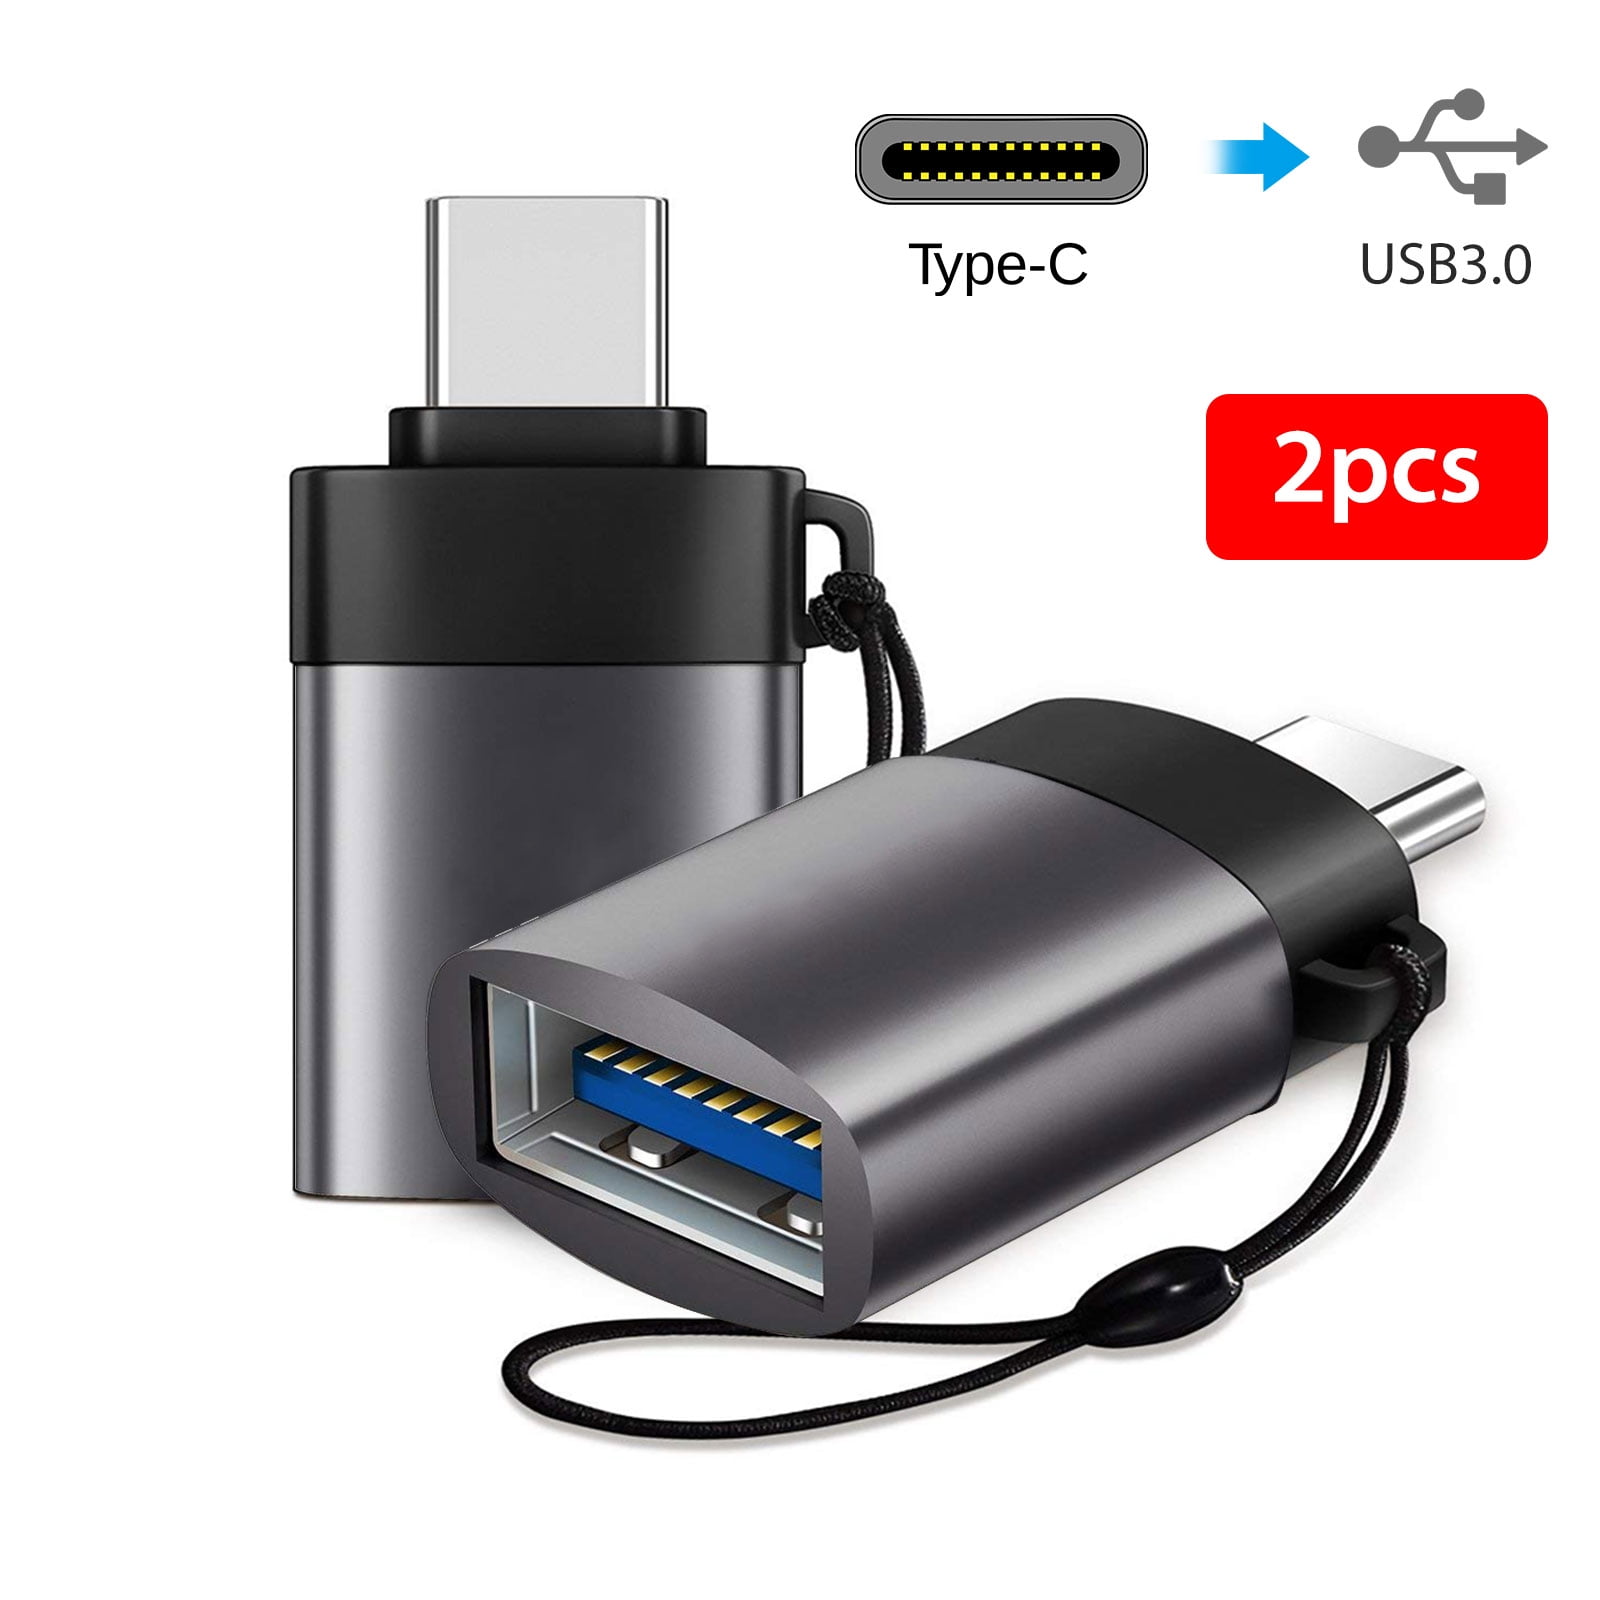 Otg Usb C Adapter, Type-c Adapter, Otg Cable